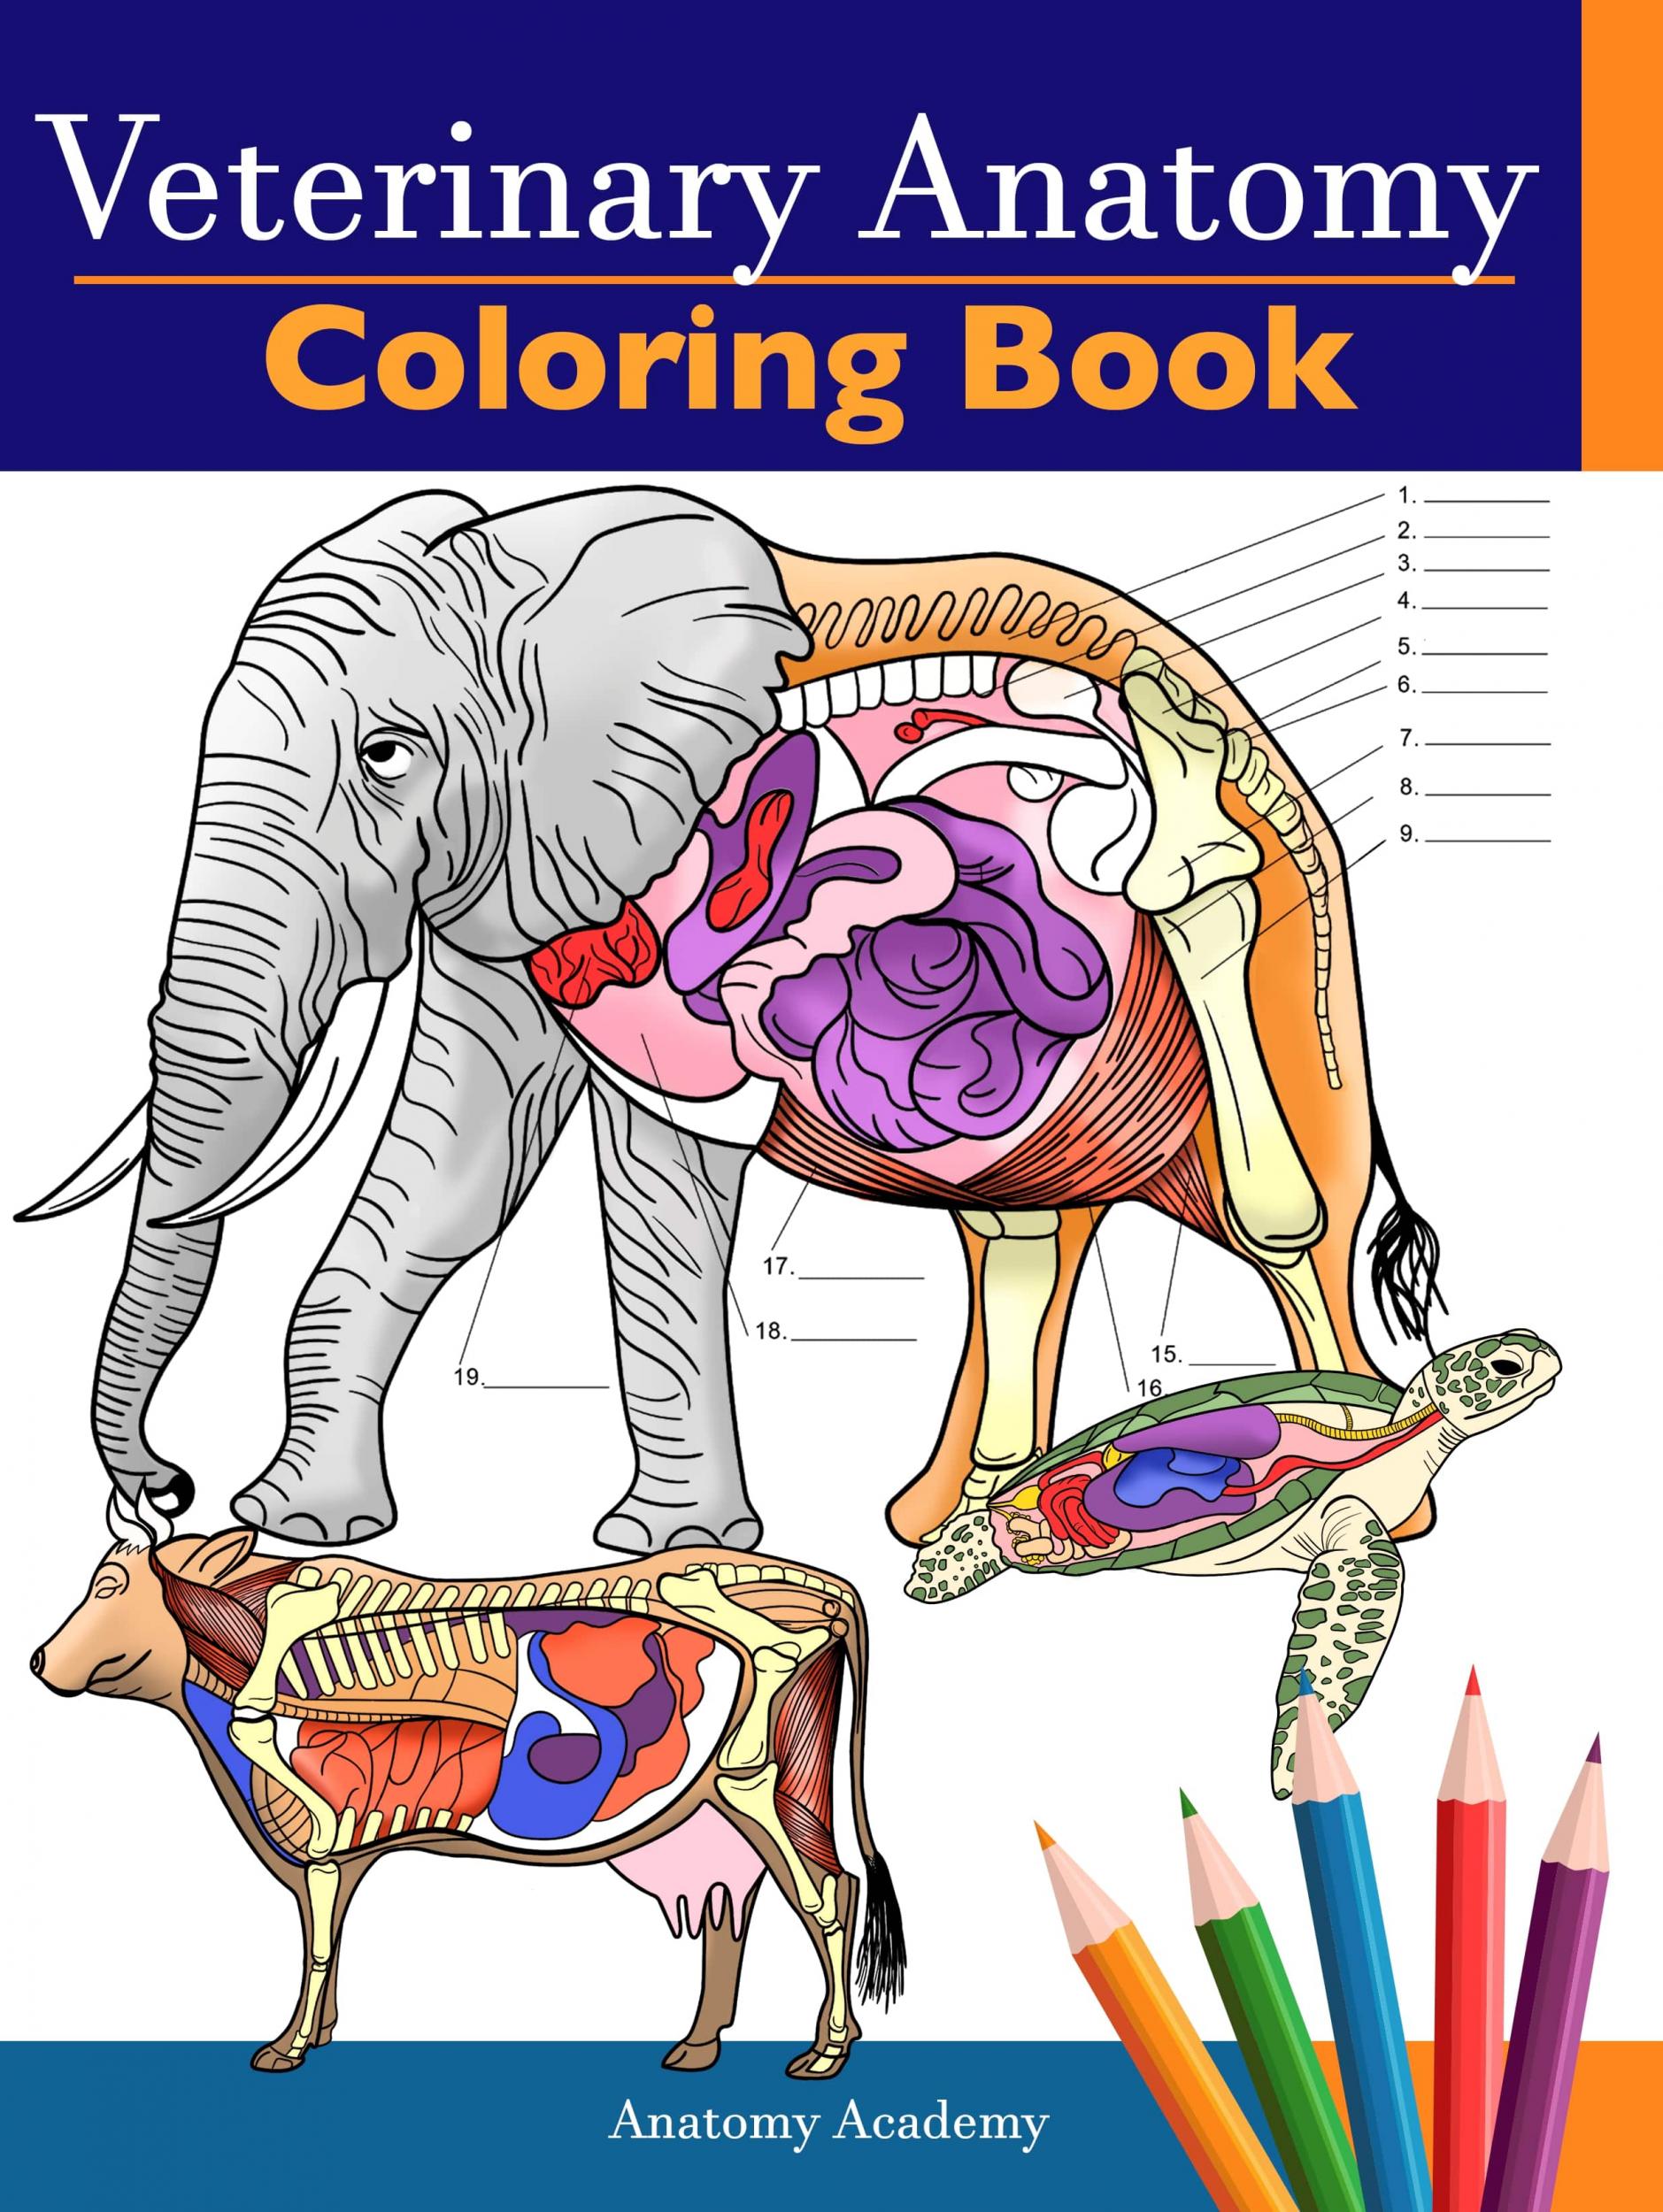 Download ARC for Veterinary Anatomy Coloring Book by Anatomy ...